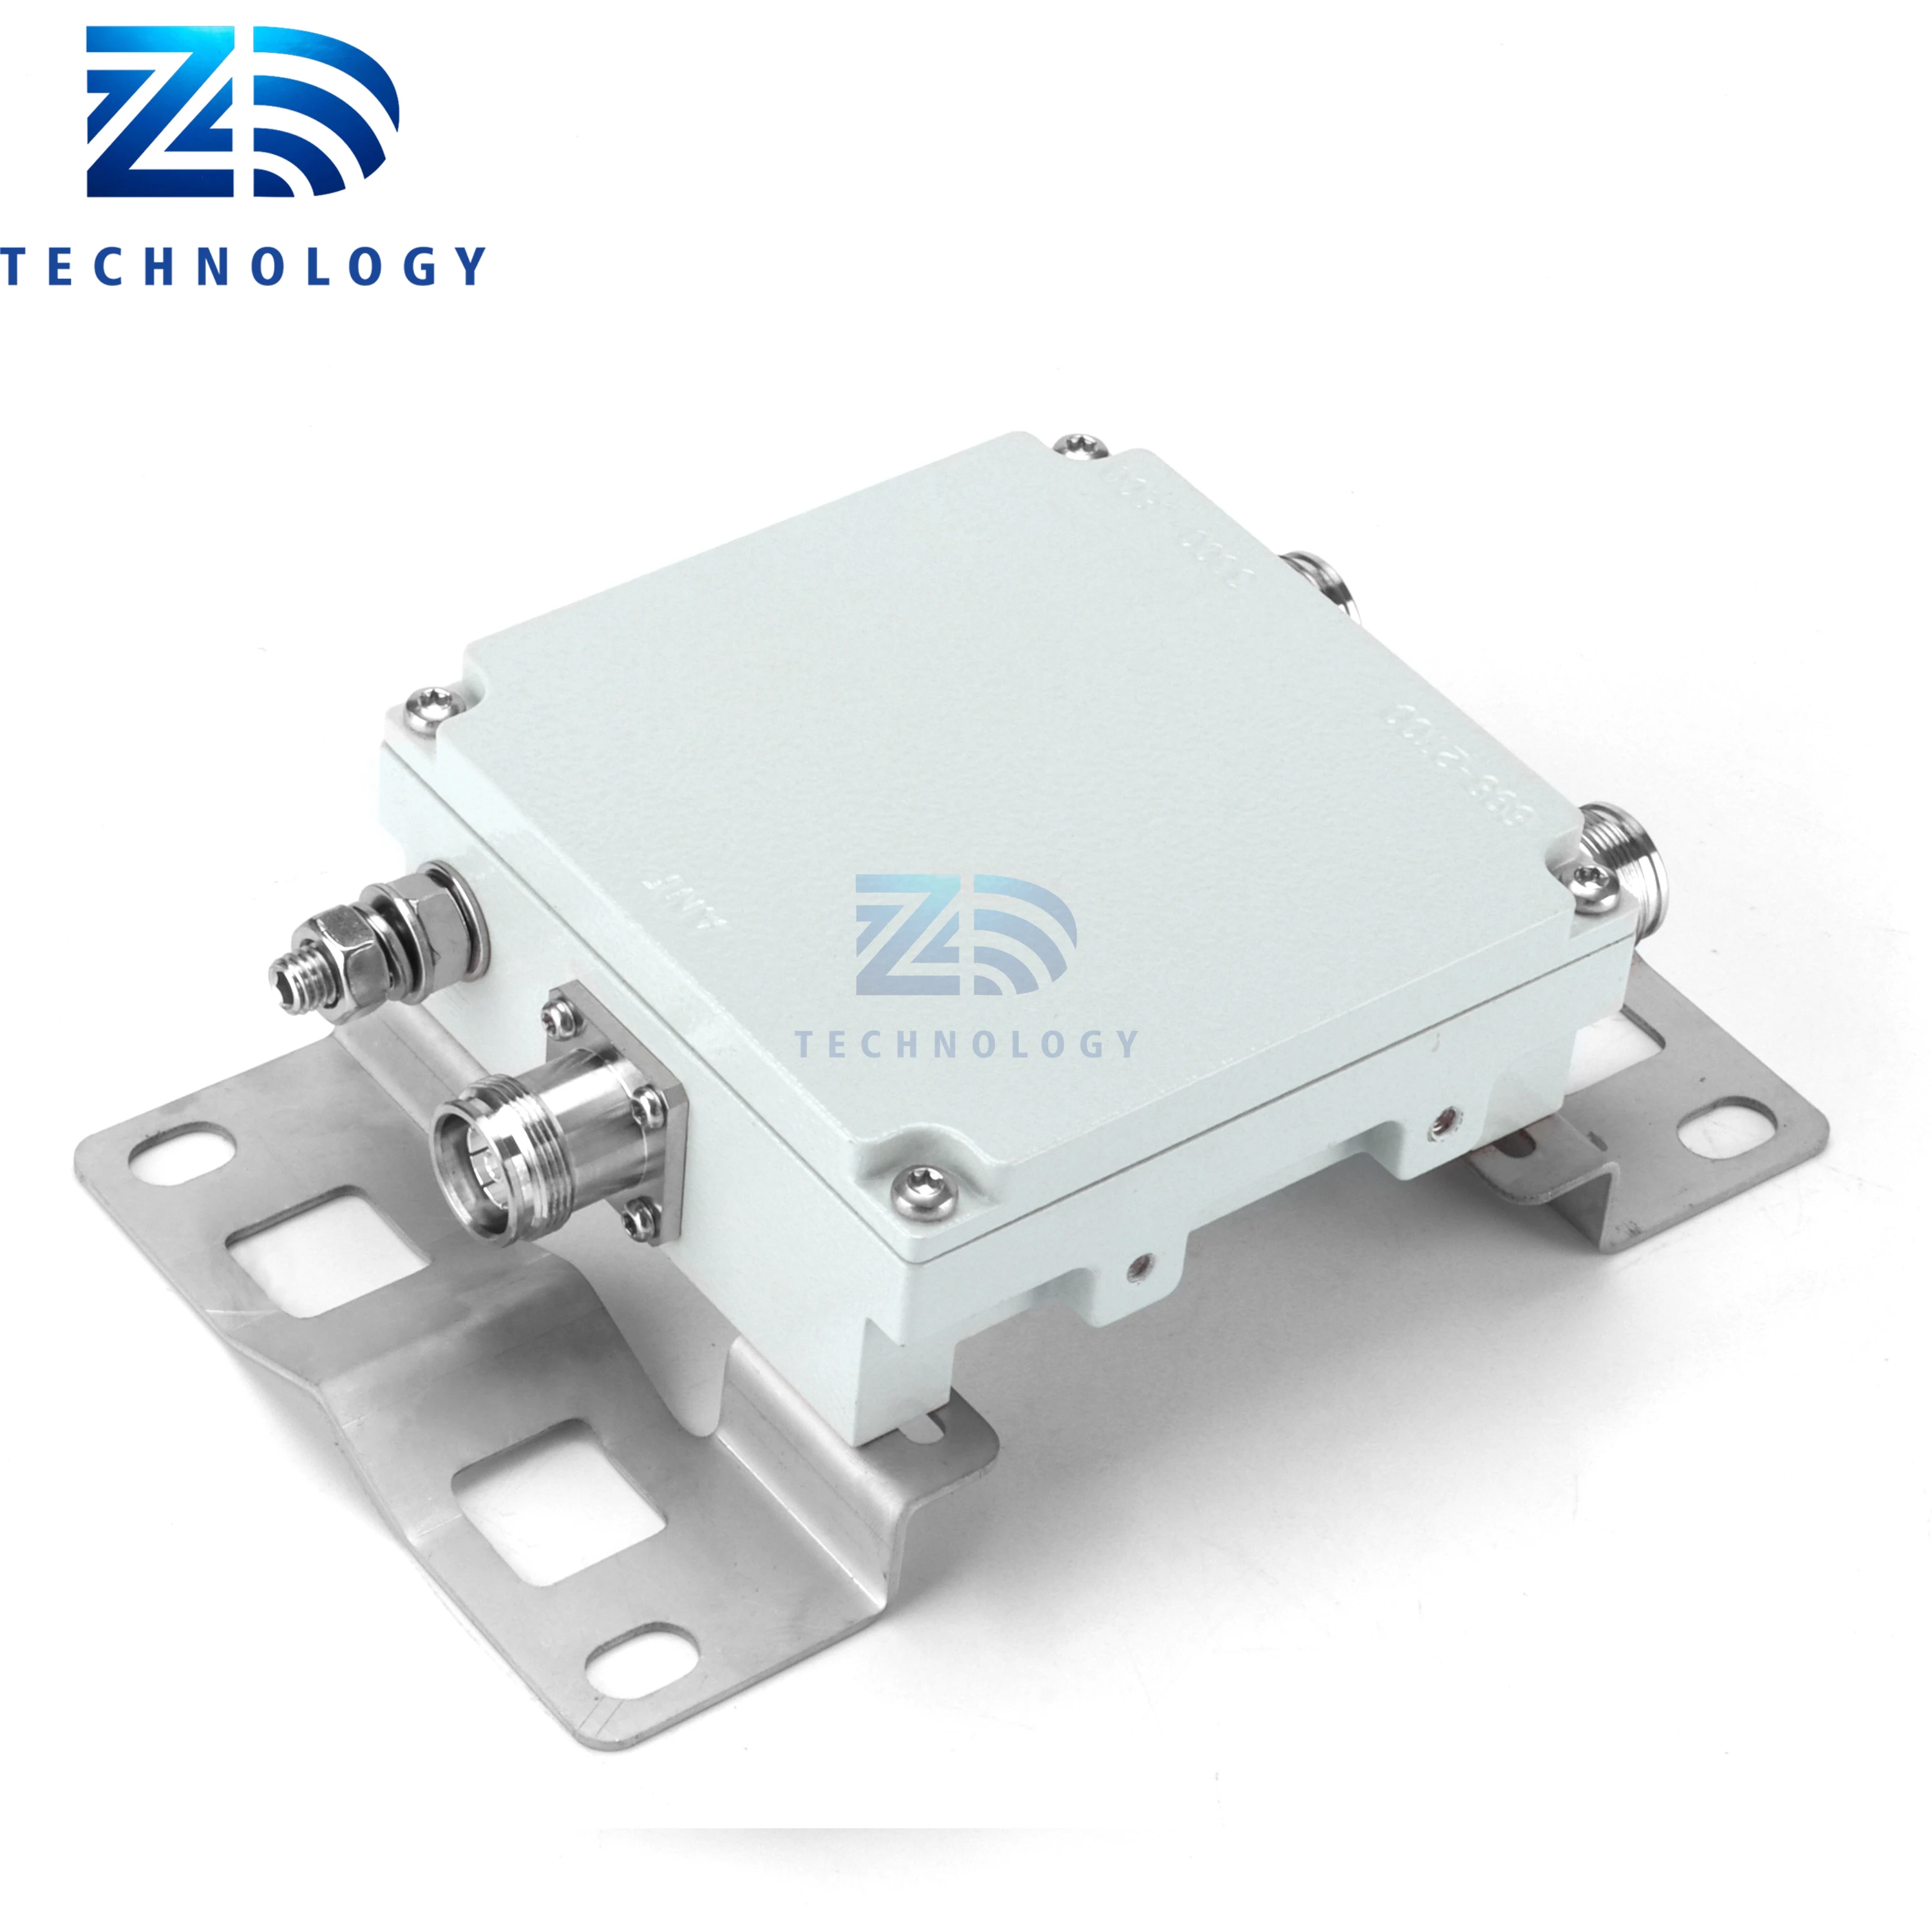 RF Combiner dual band power divider 698 2700MHz &3300 3800Hz 2 way combiner with 4.3 10 Female connector (1600373116434)